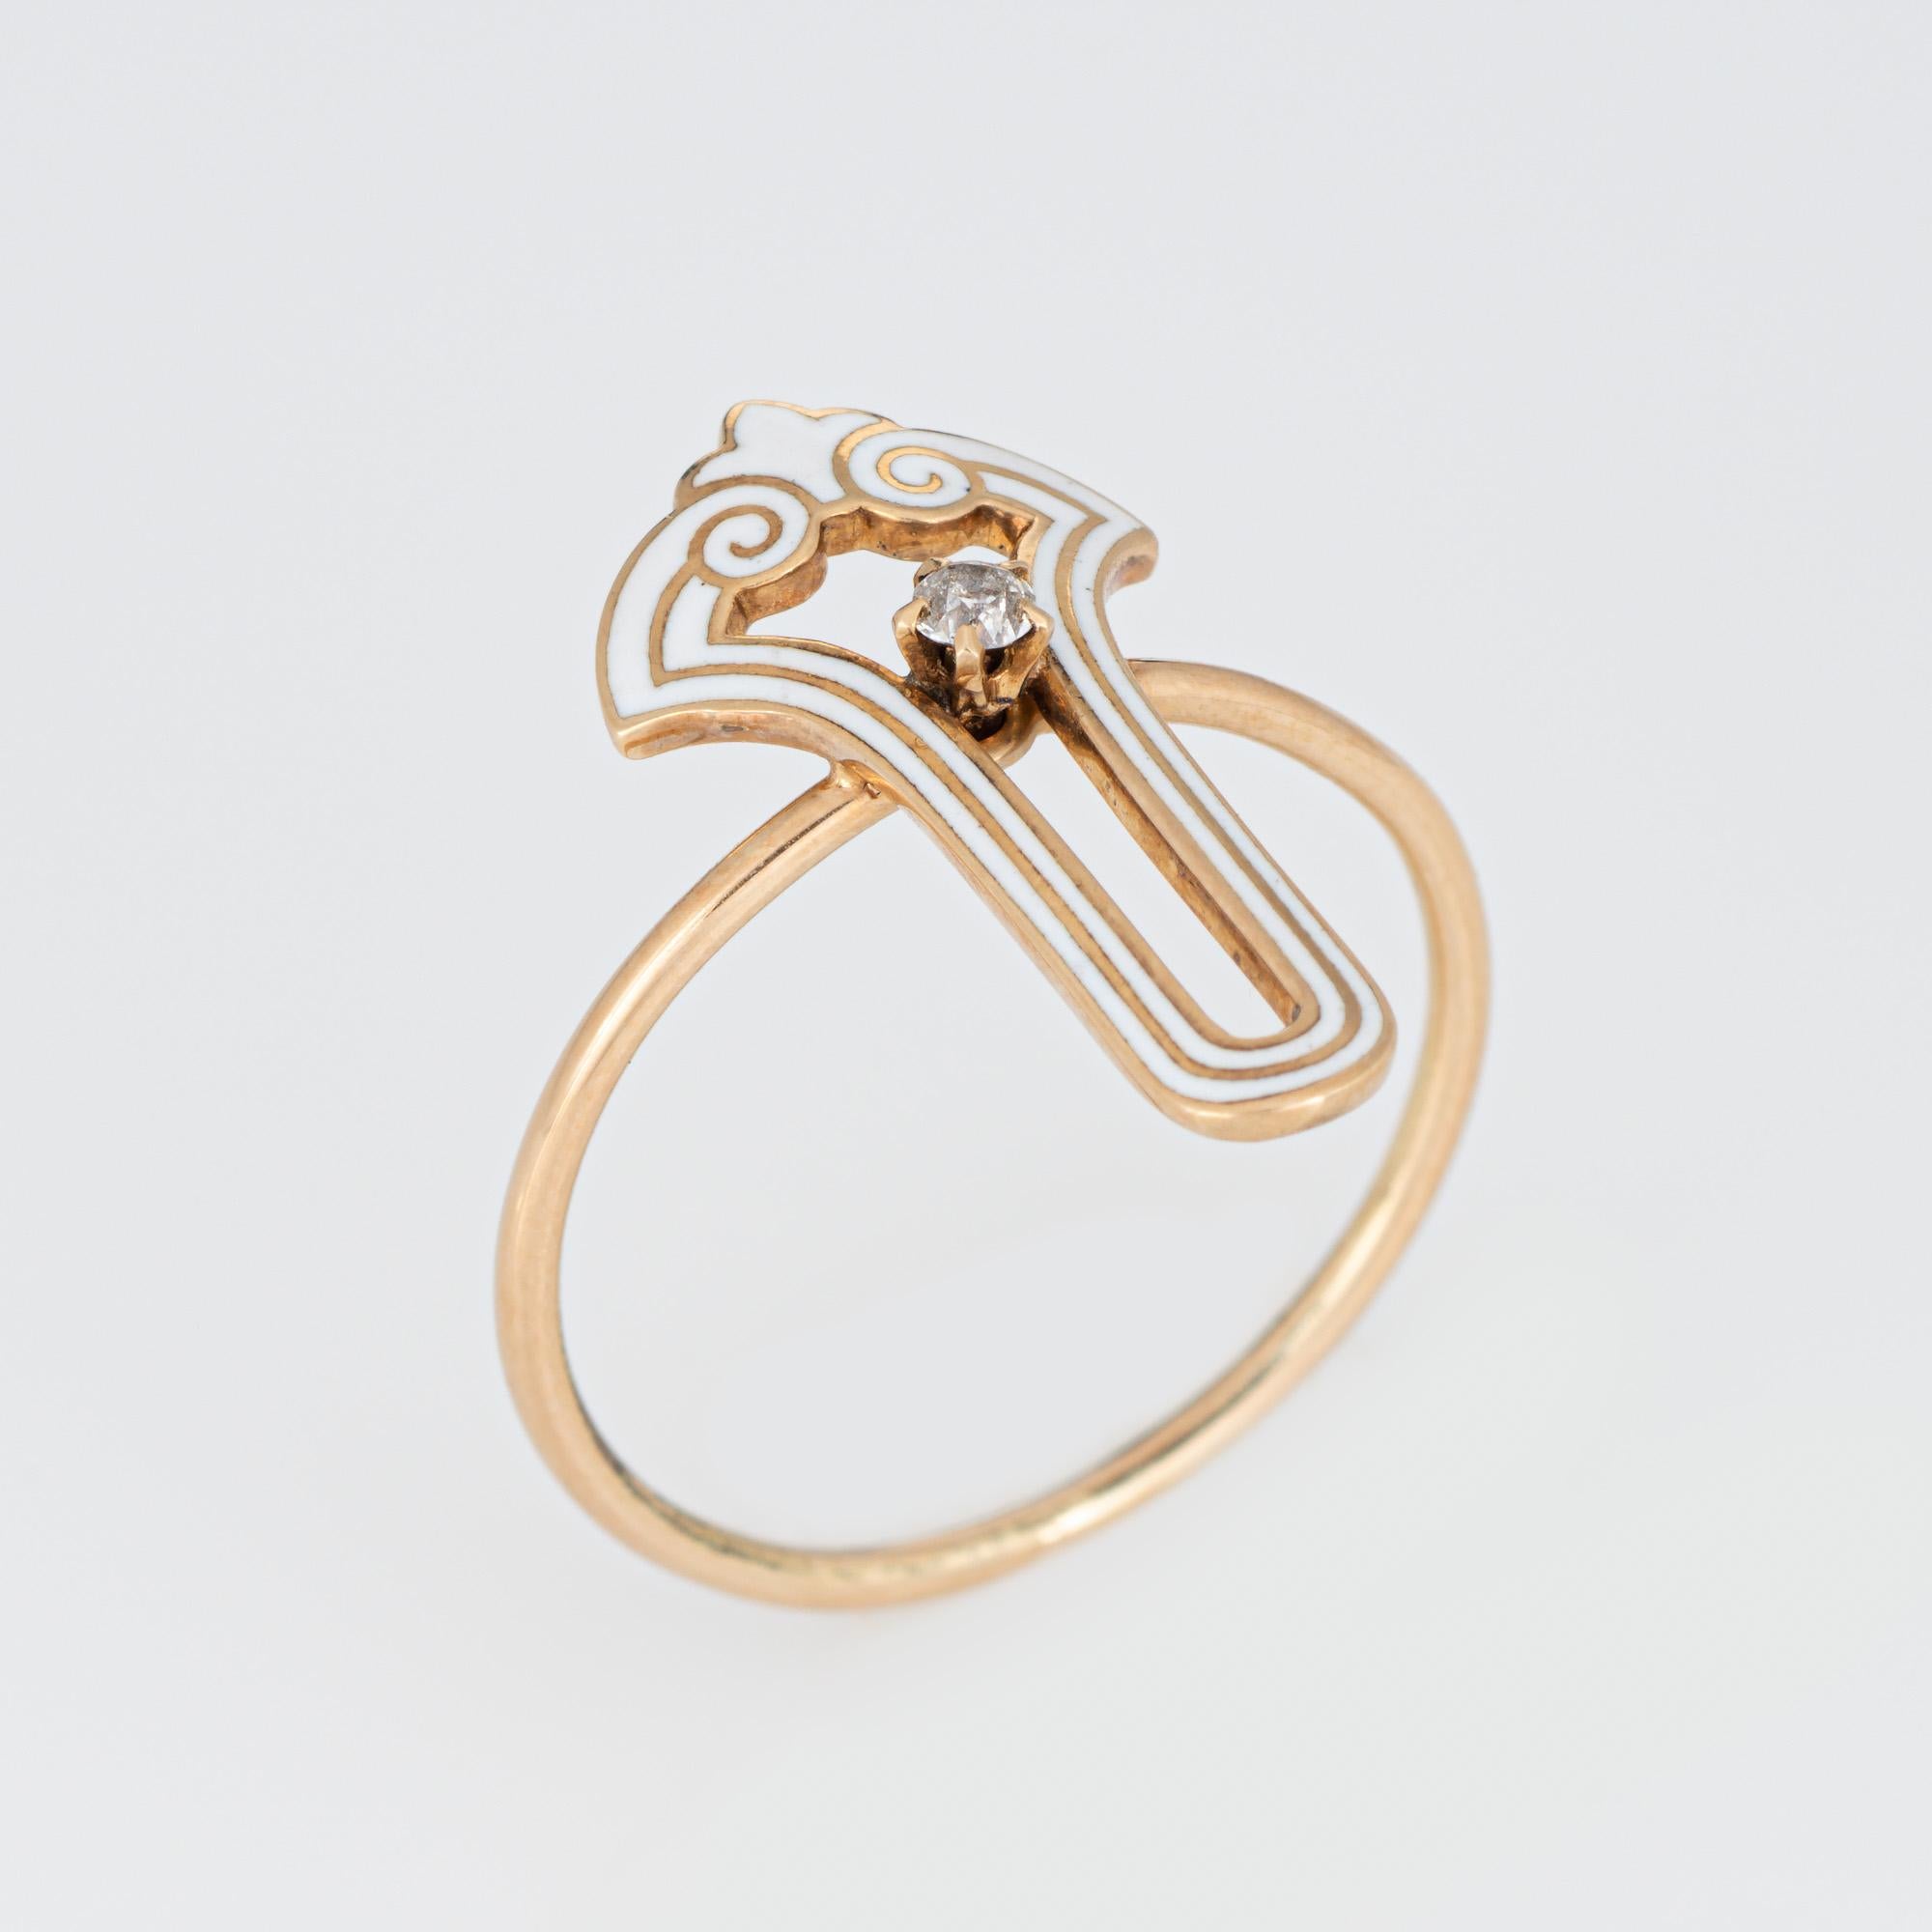 Originally an Art Deco era stick pin (circa 1920s to 1930s), the diamond & white enamel ring is crafted in 14 karat yellow gold.

The ring is mounted with the original stick pin. Our jeweler rounded the stick pin into a slim band for the finger. The